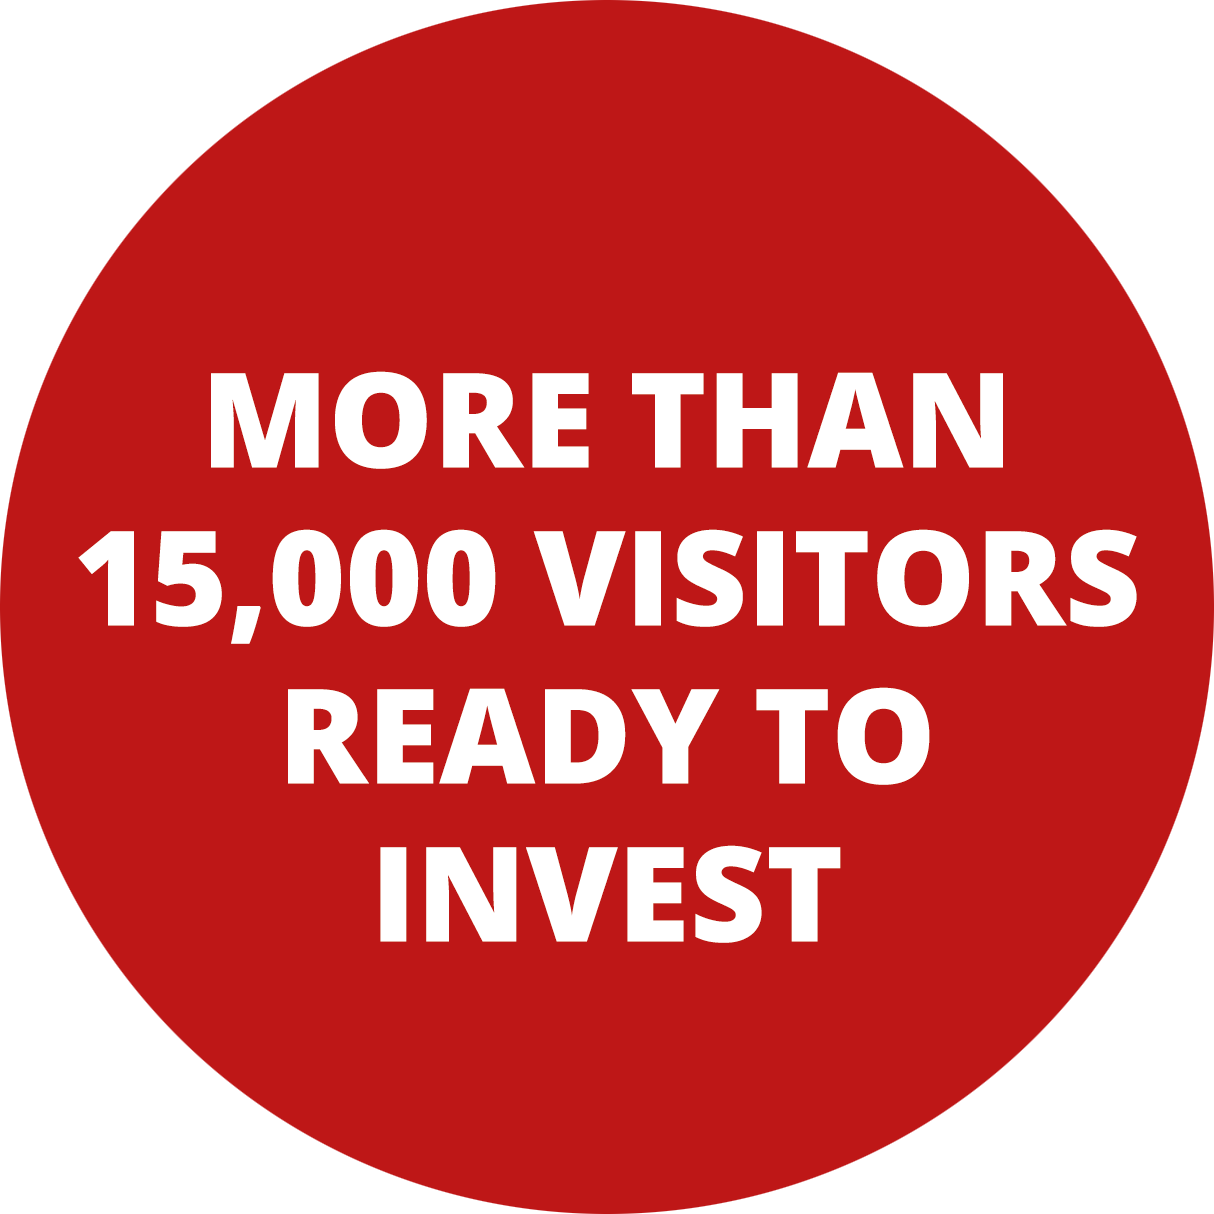 More than 15,000 visitors ready to invest